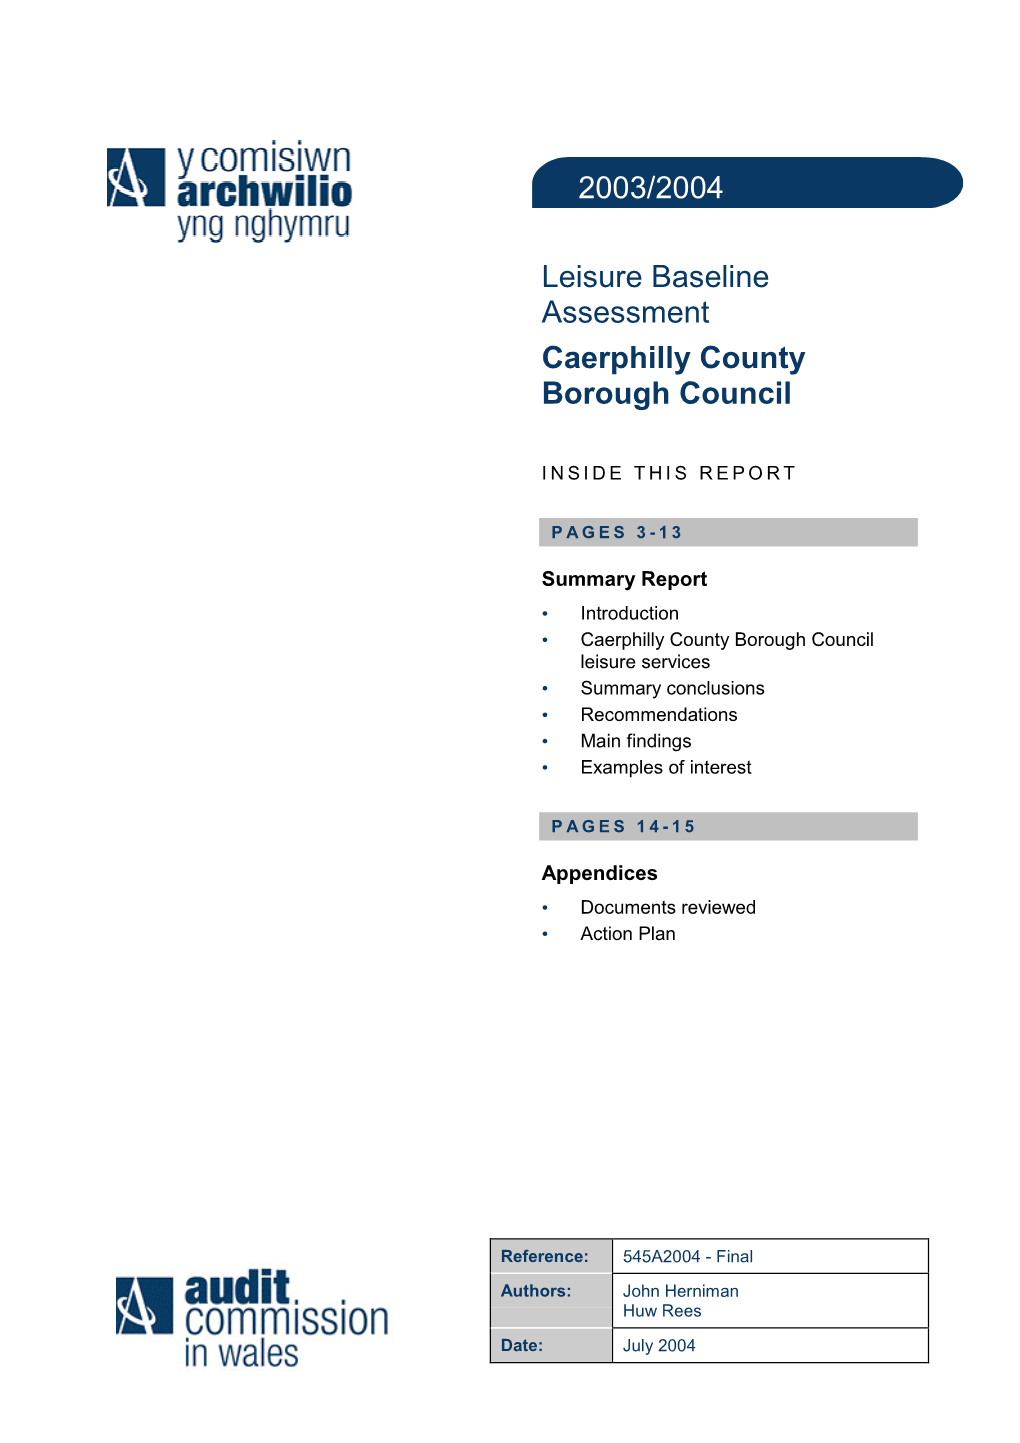 2003/2004 Leisure Baseline Assessment Caerphilly County Borough Council